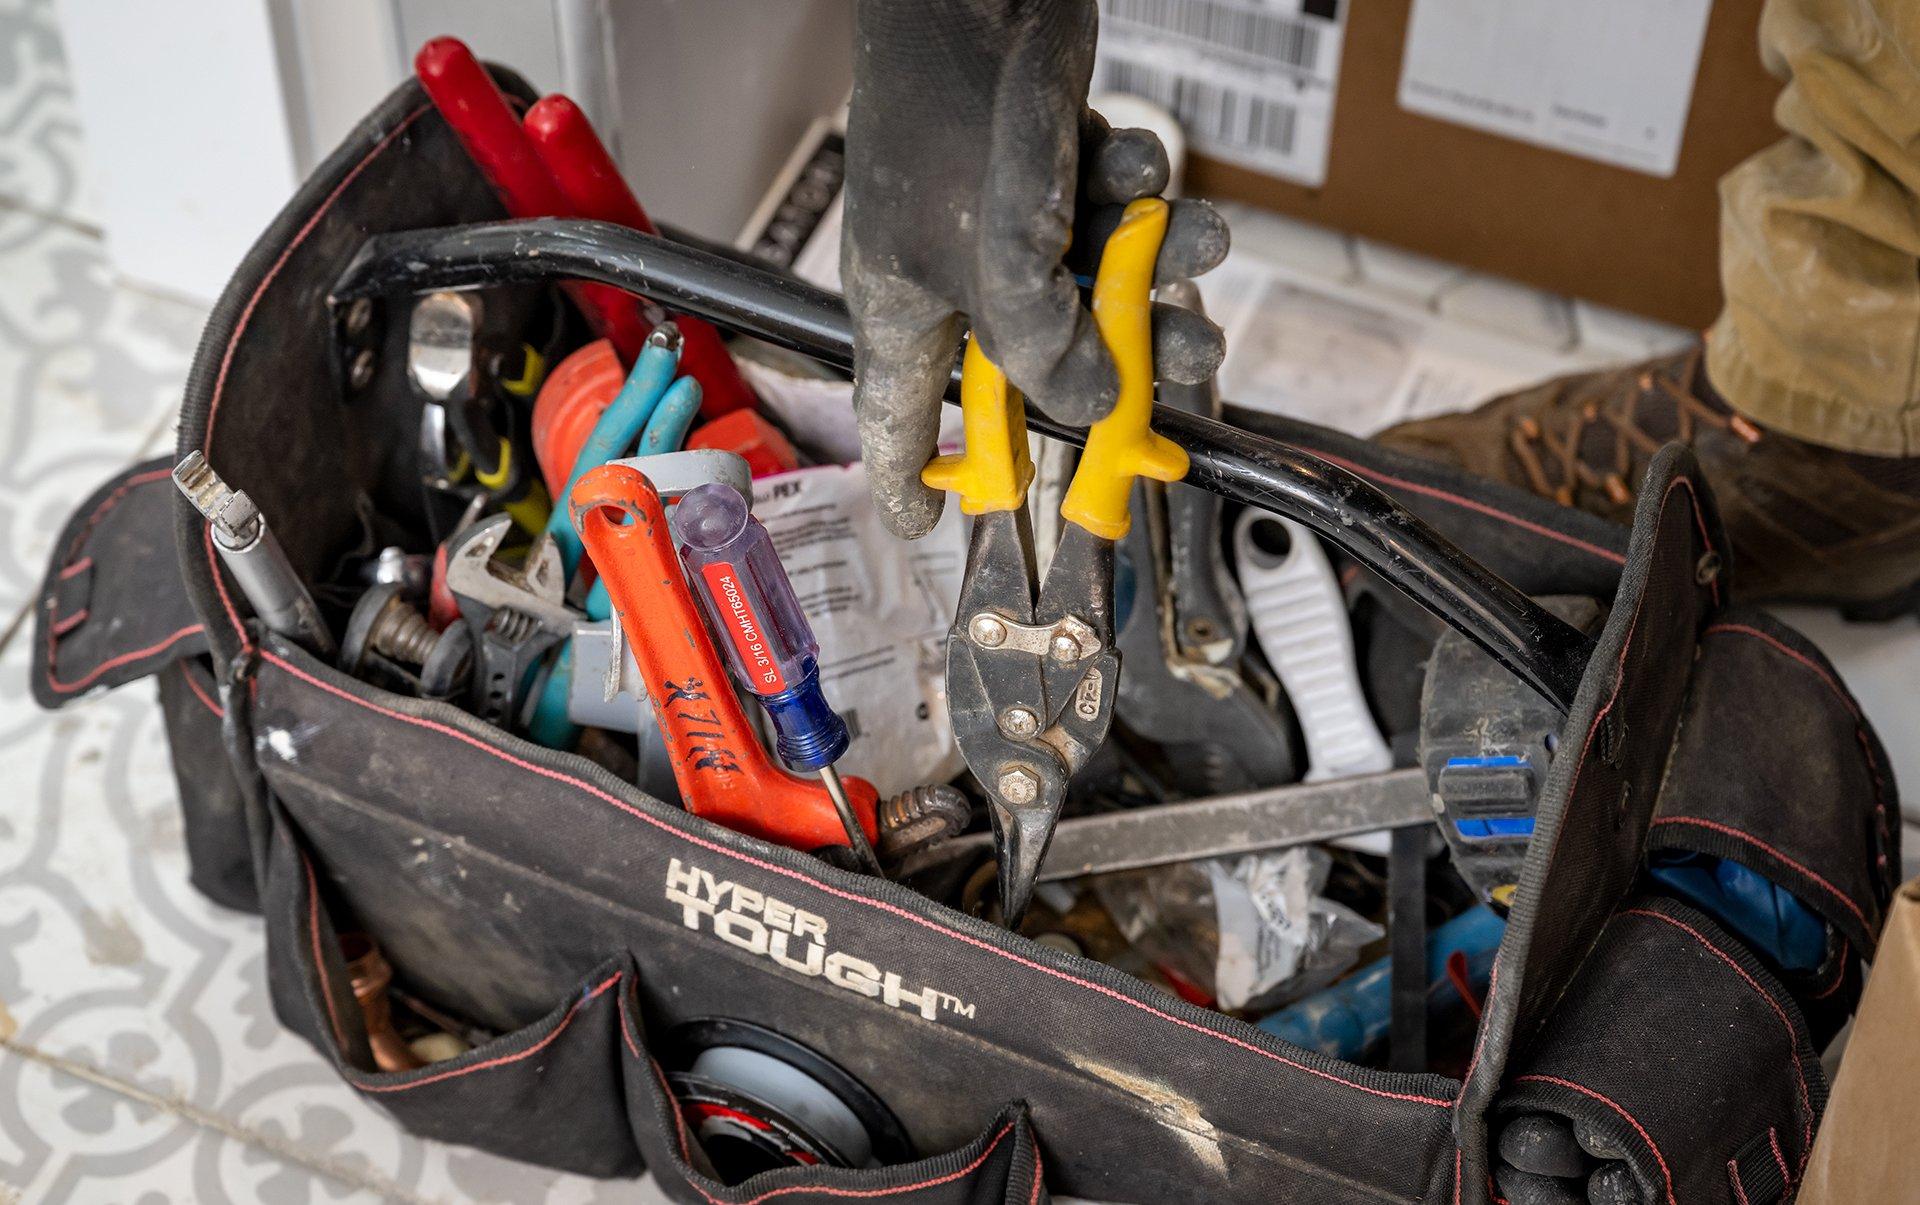 A plumber’s tool bag overflows with tools in a residential bathroom.